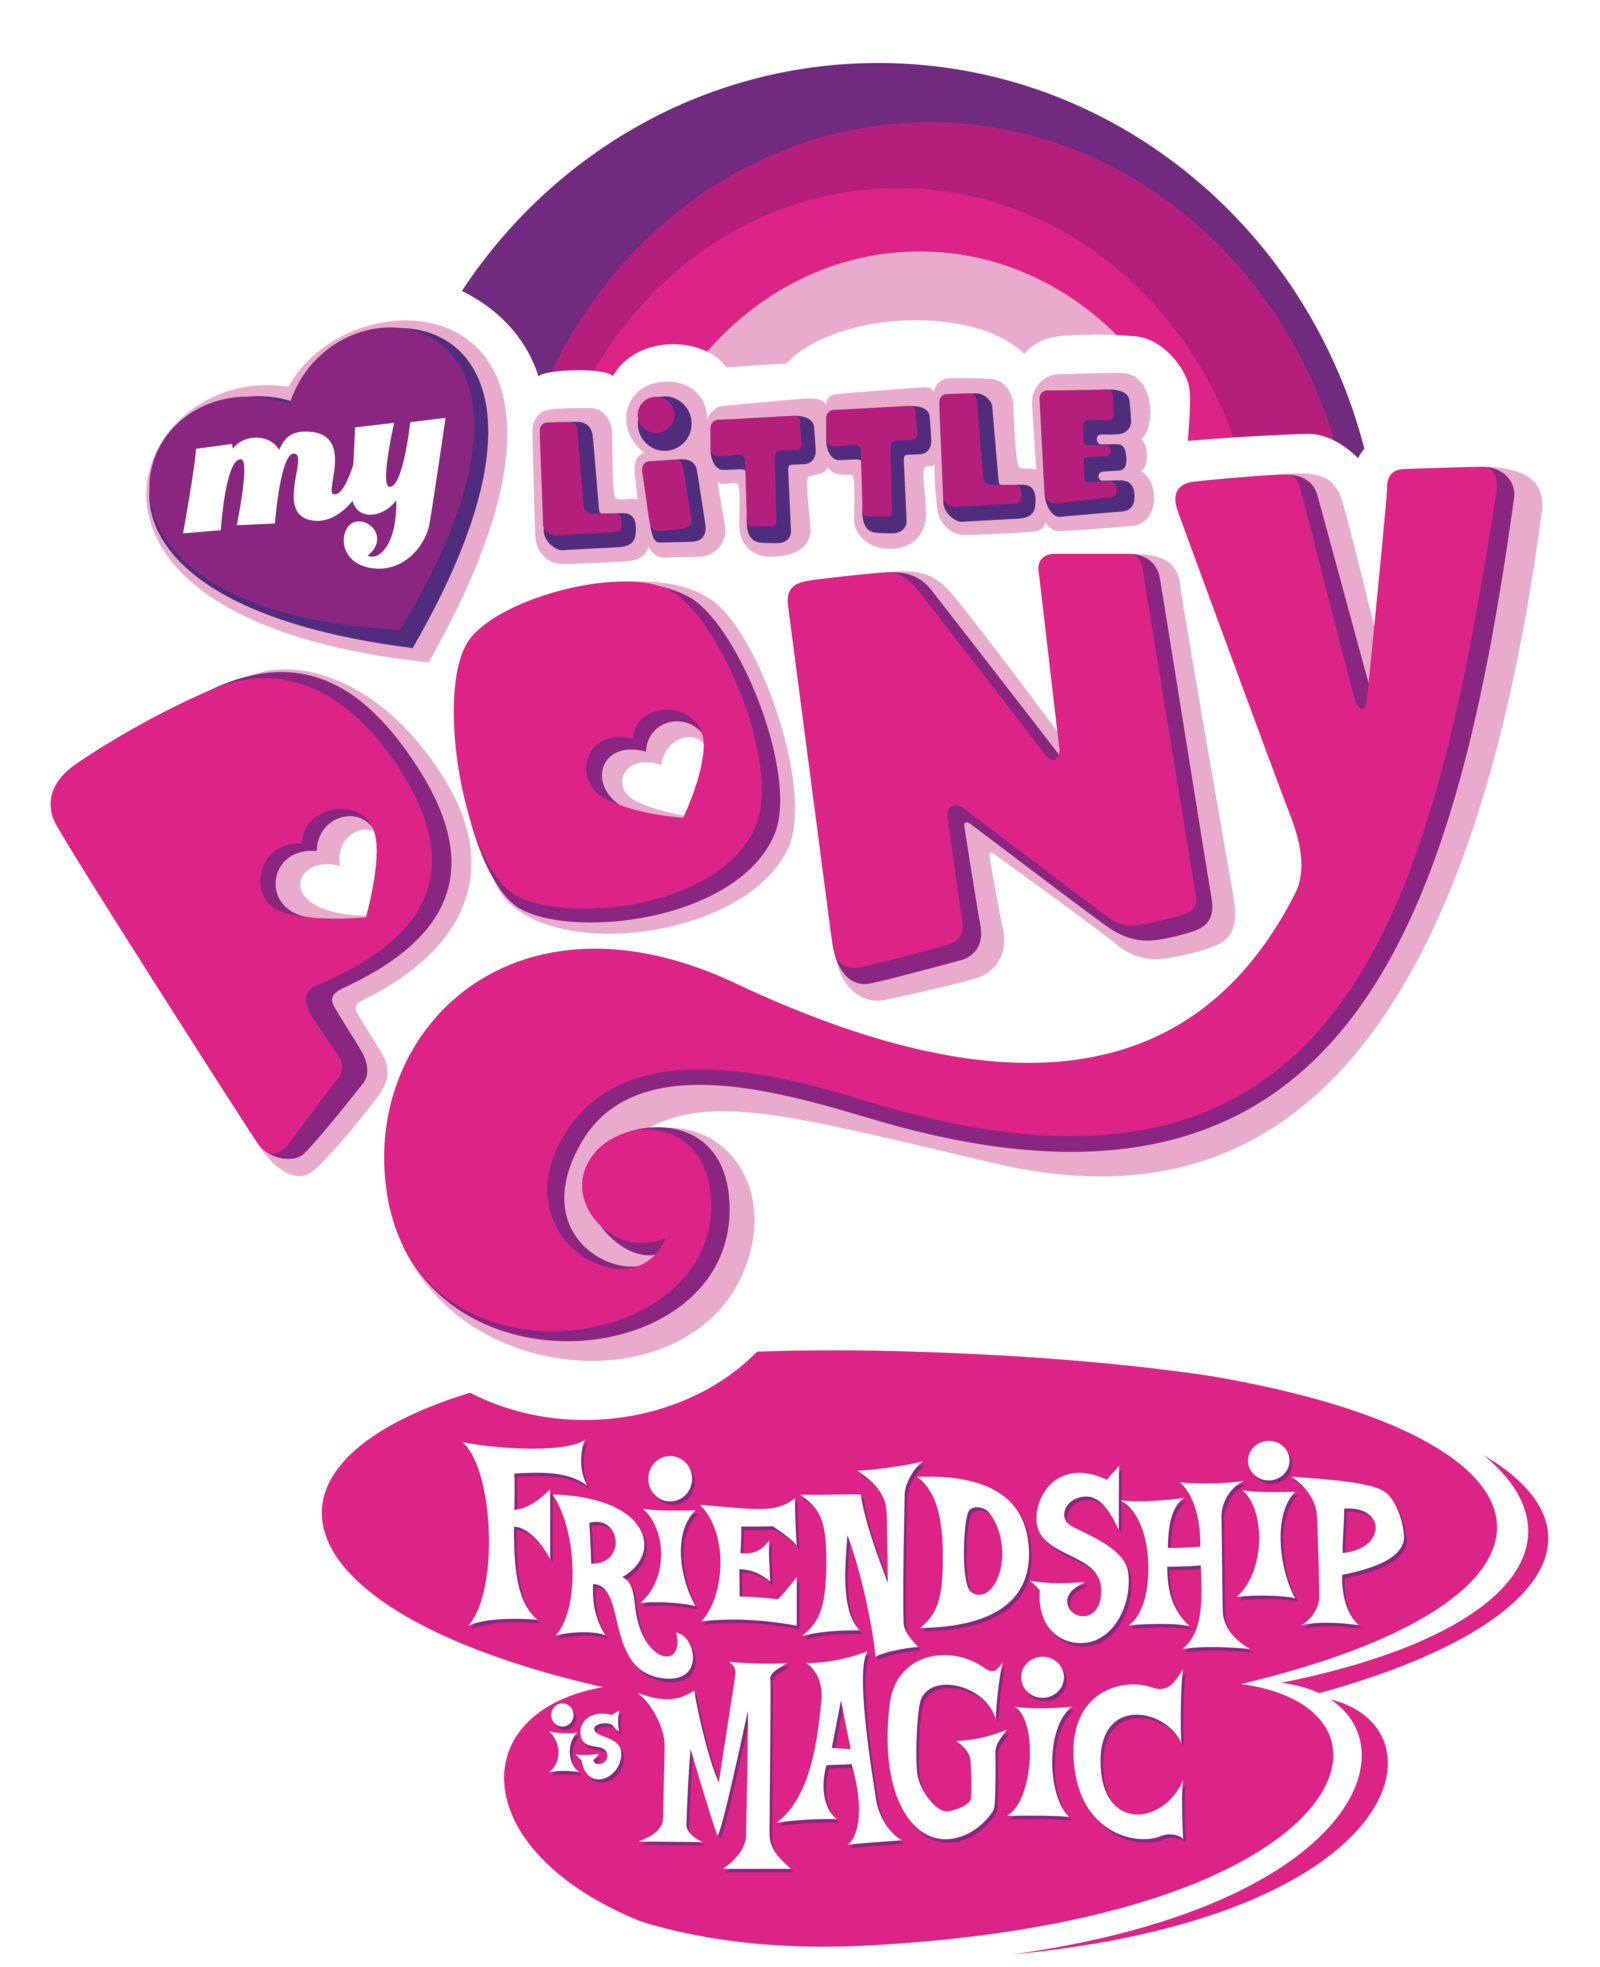 My Little Pony- Official Club!